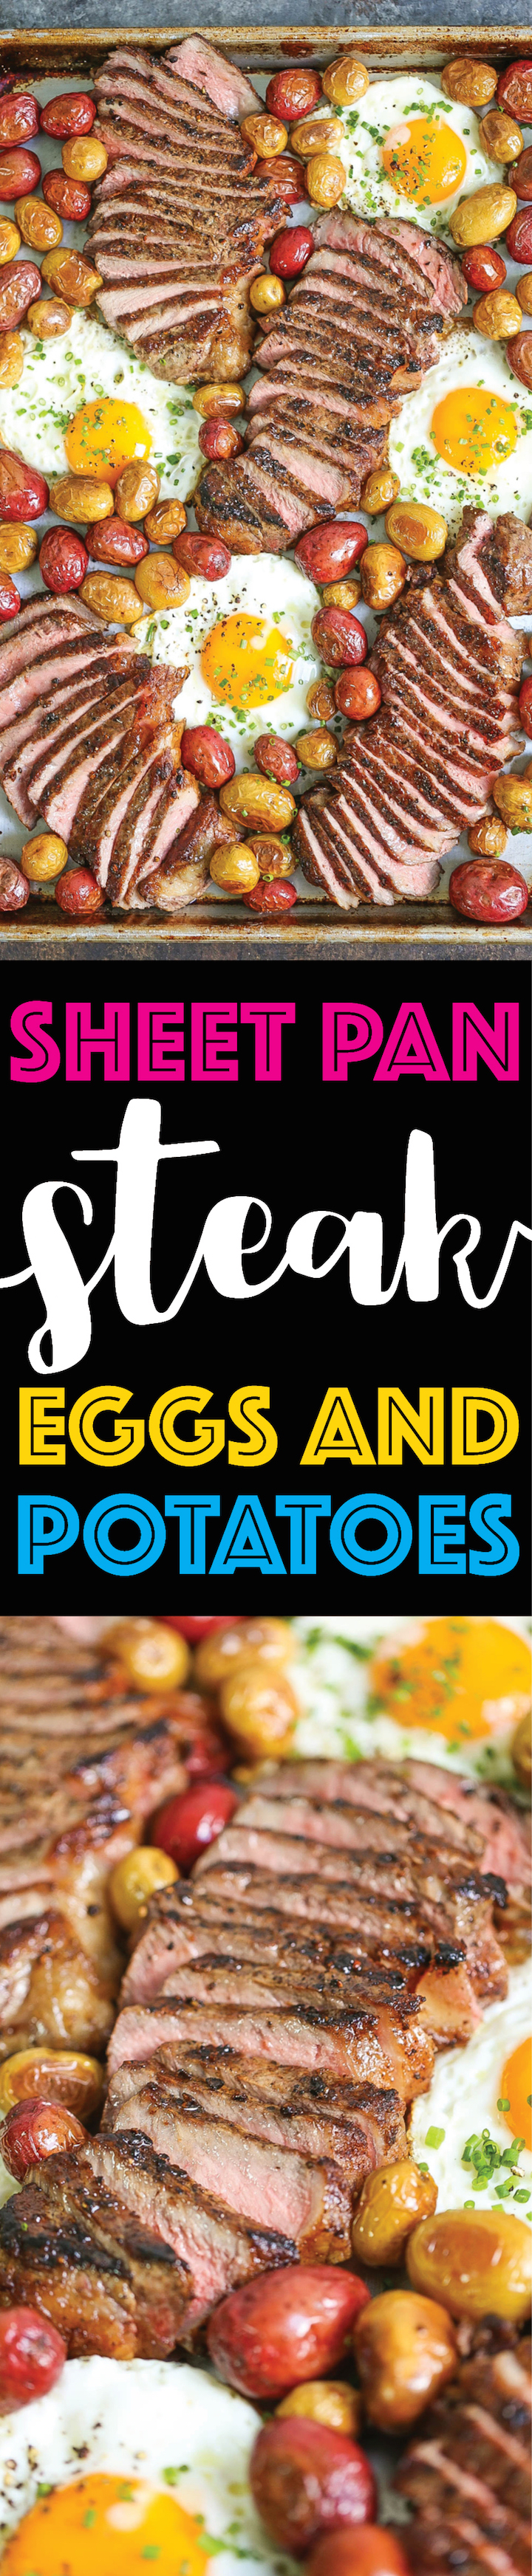 Sheet Pan Steak Eggs and Potatoes - Everyone's favorite steak and eggs turned into a complete SHEET PAN BREAKFAST! No fuss, no extra pans and easy clean up!